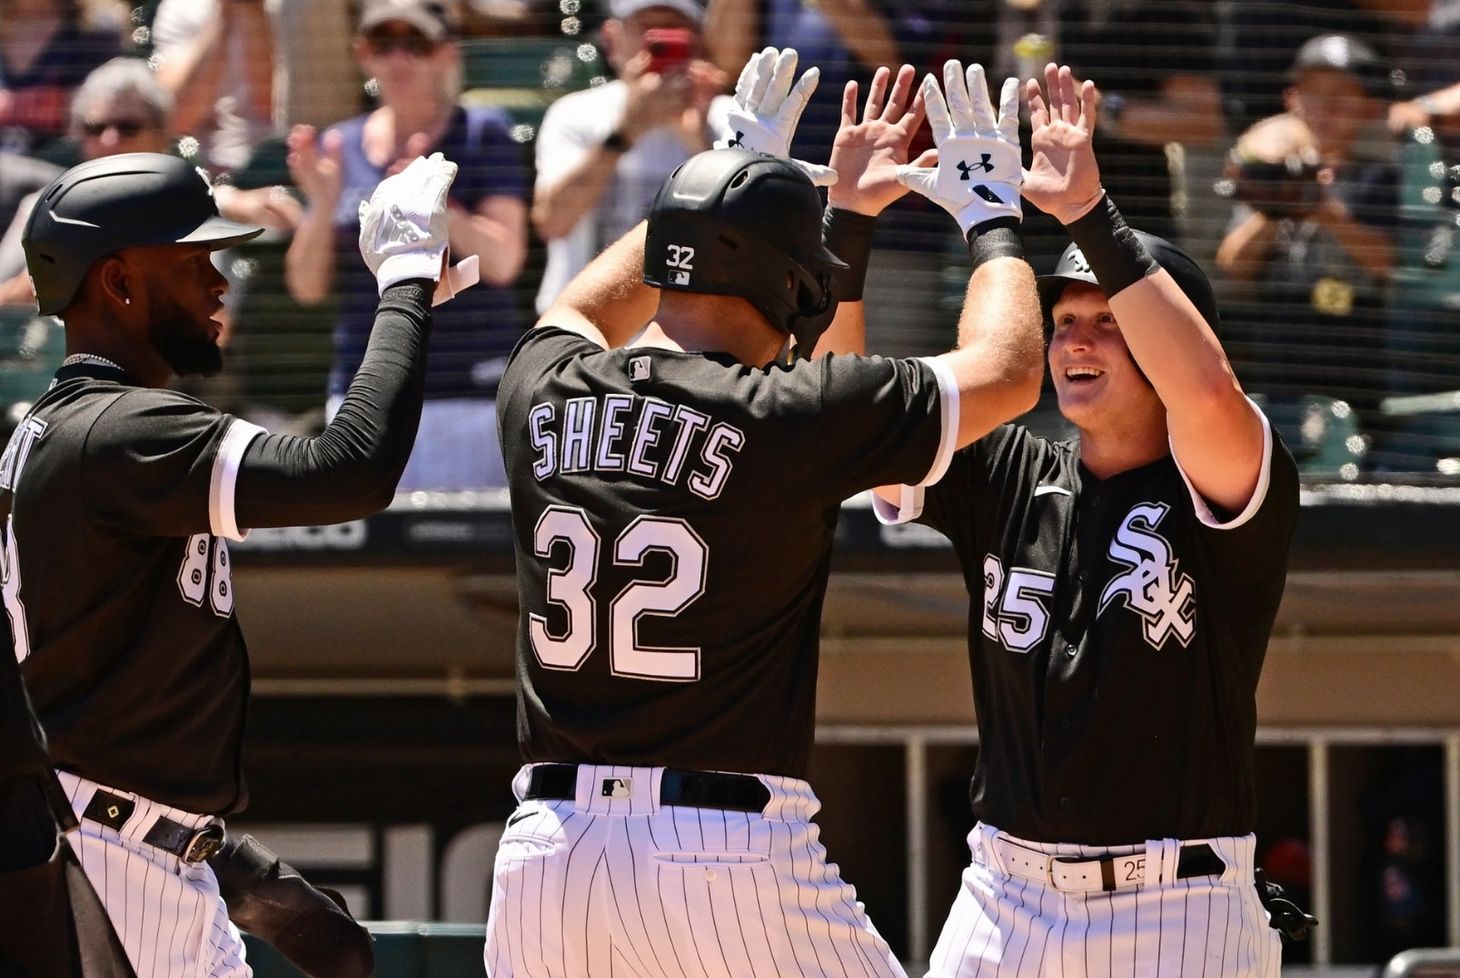 Cueto, White Sox end Tigers' 6-game win streak with 8-0 rout